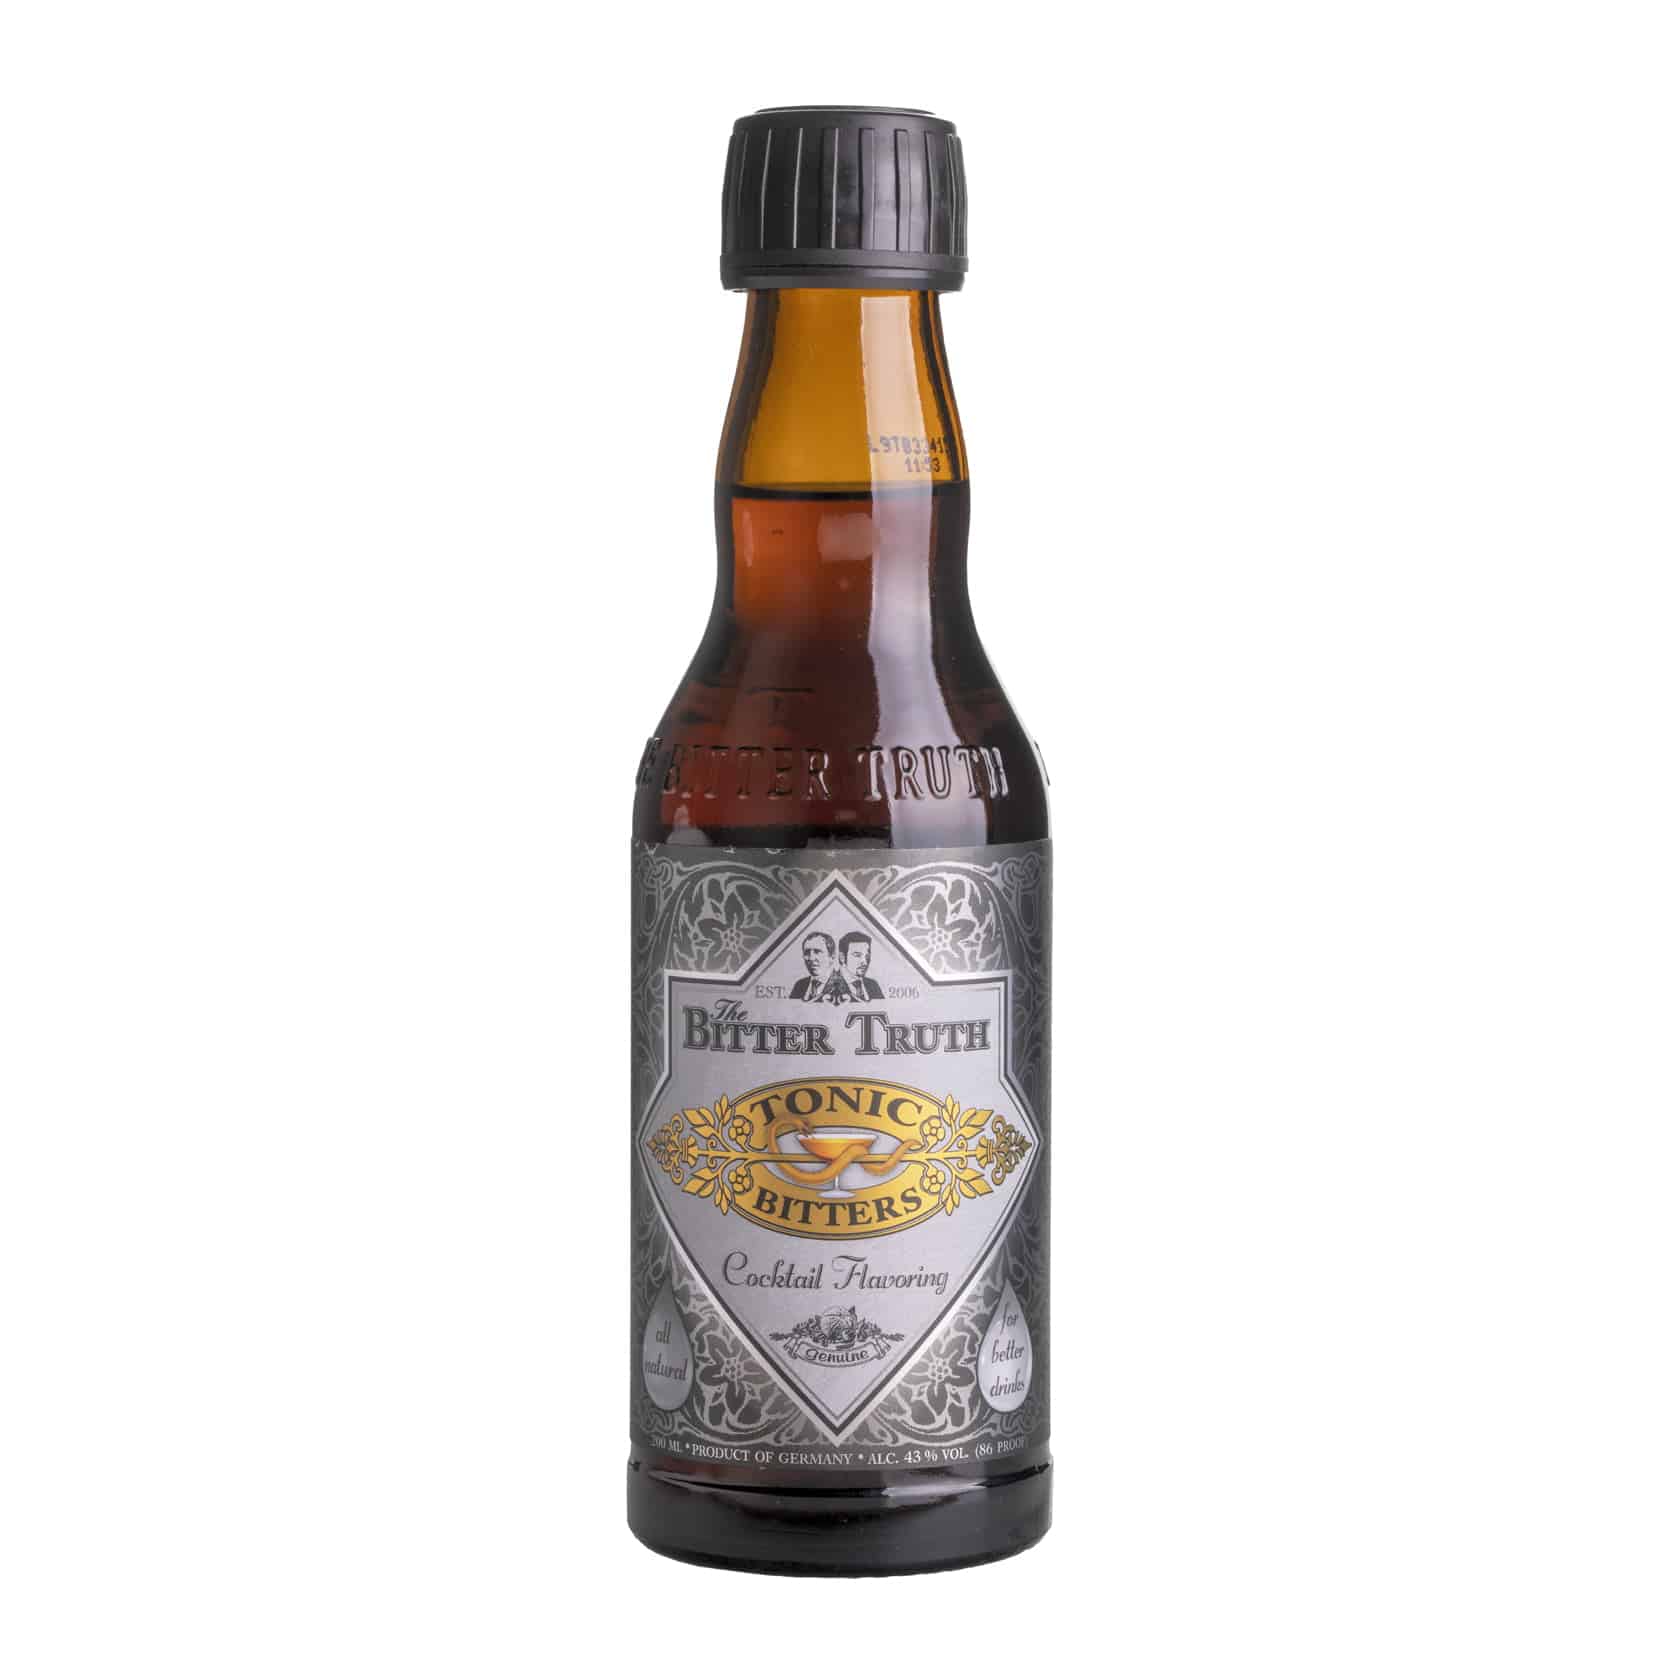 Licor Bitter Truth Tonic Cocktail Flavoring 43%